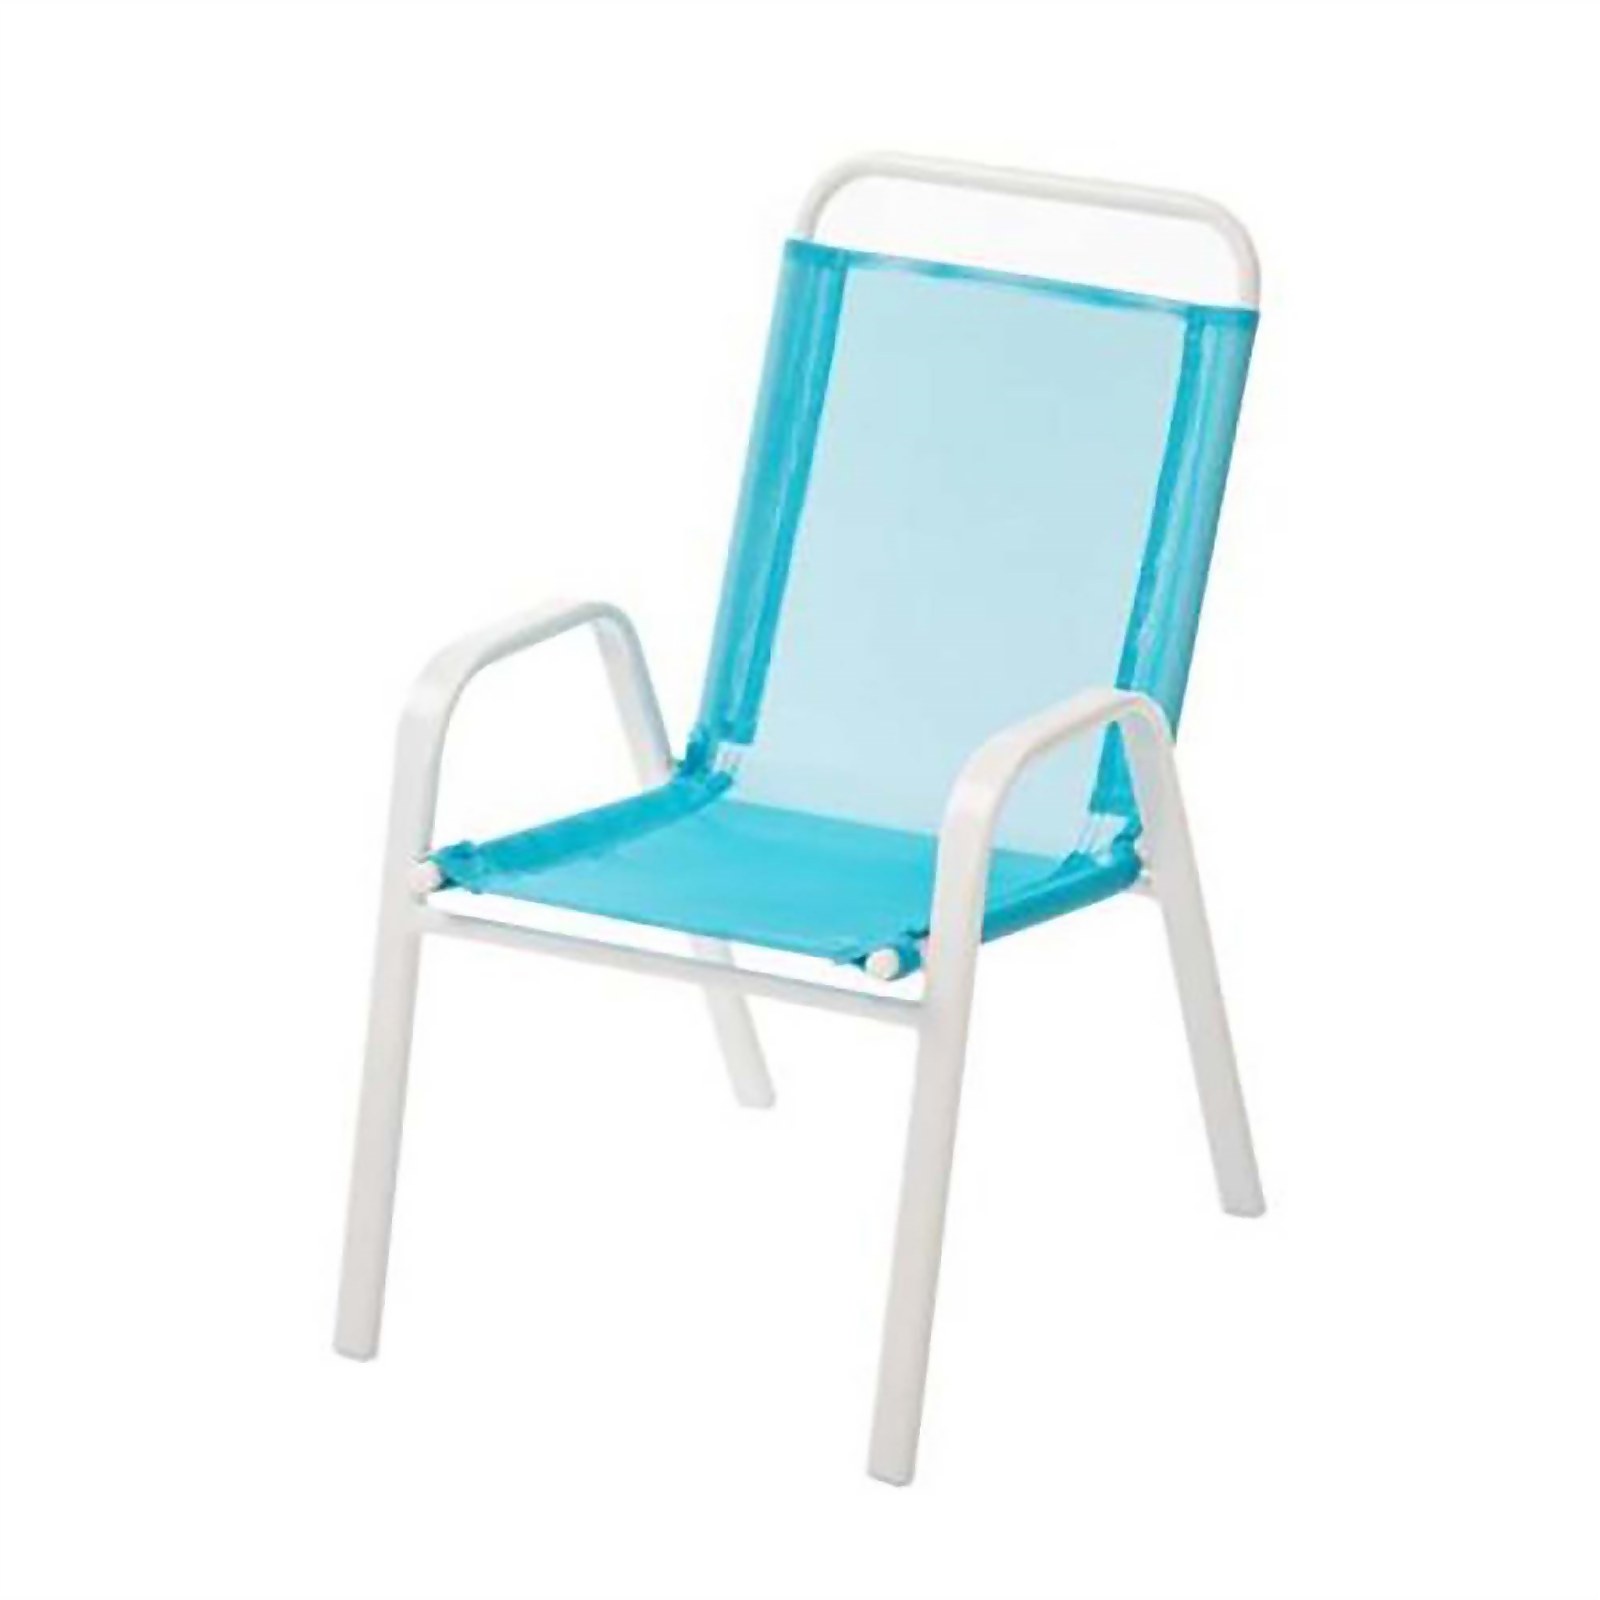 Photo of Kids Metal Stacking Chair - Blue